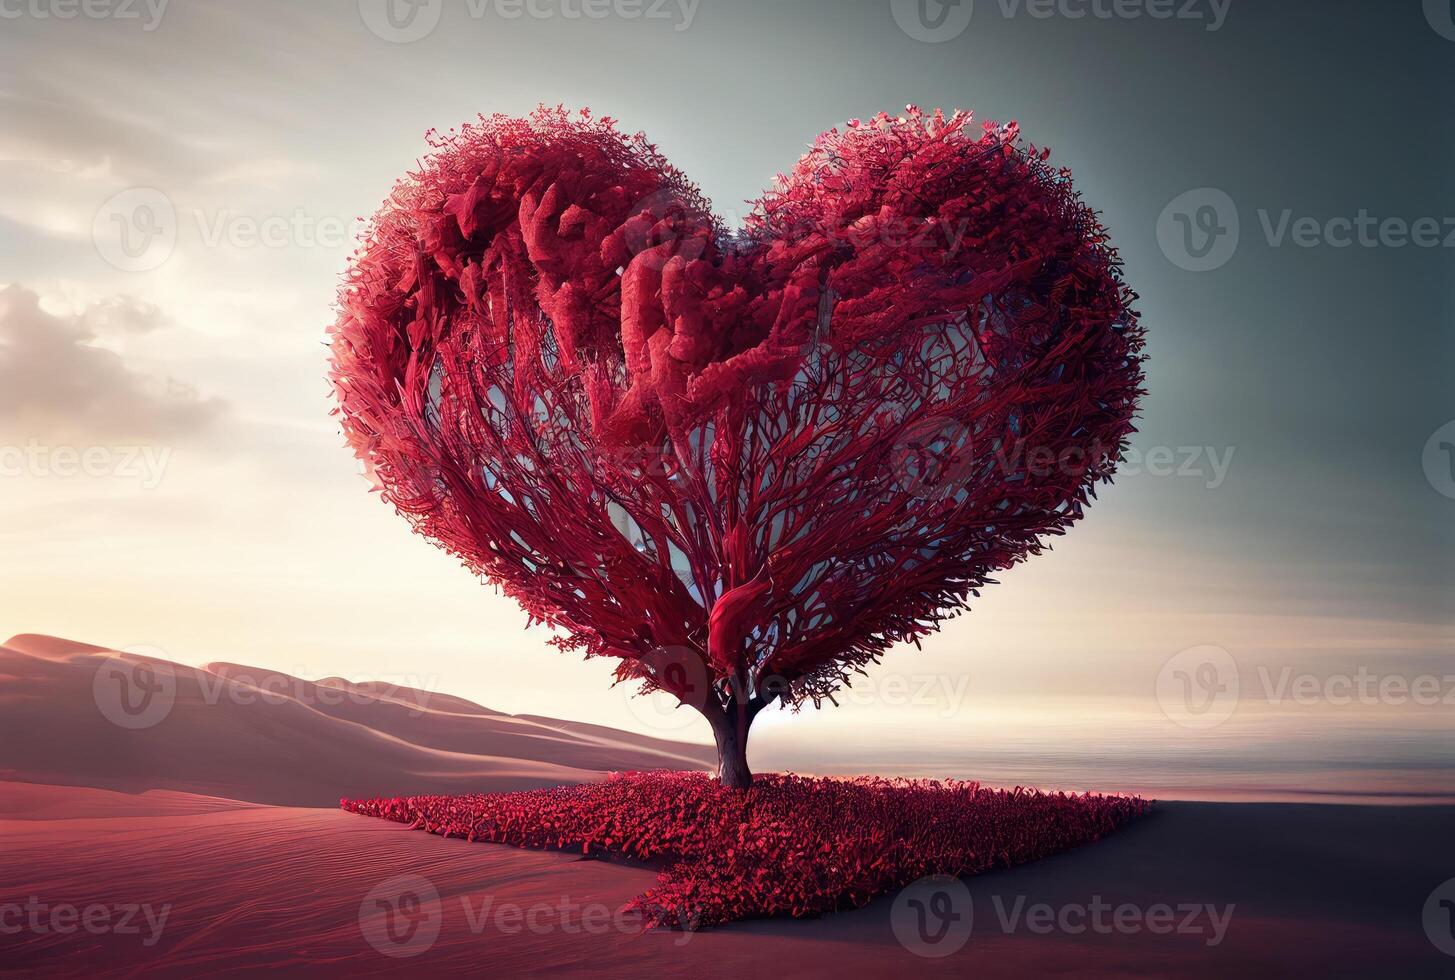 Red heart shape tree landscape with sky background. Valentines day and romance concept. Digital art illustration. photo